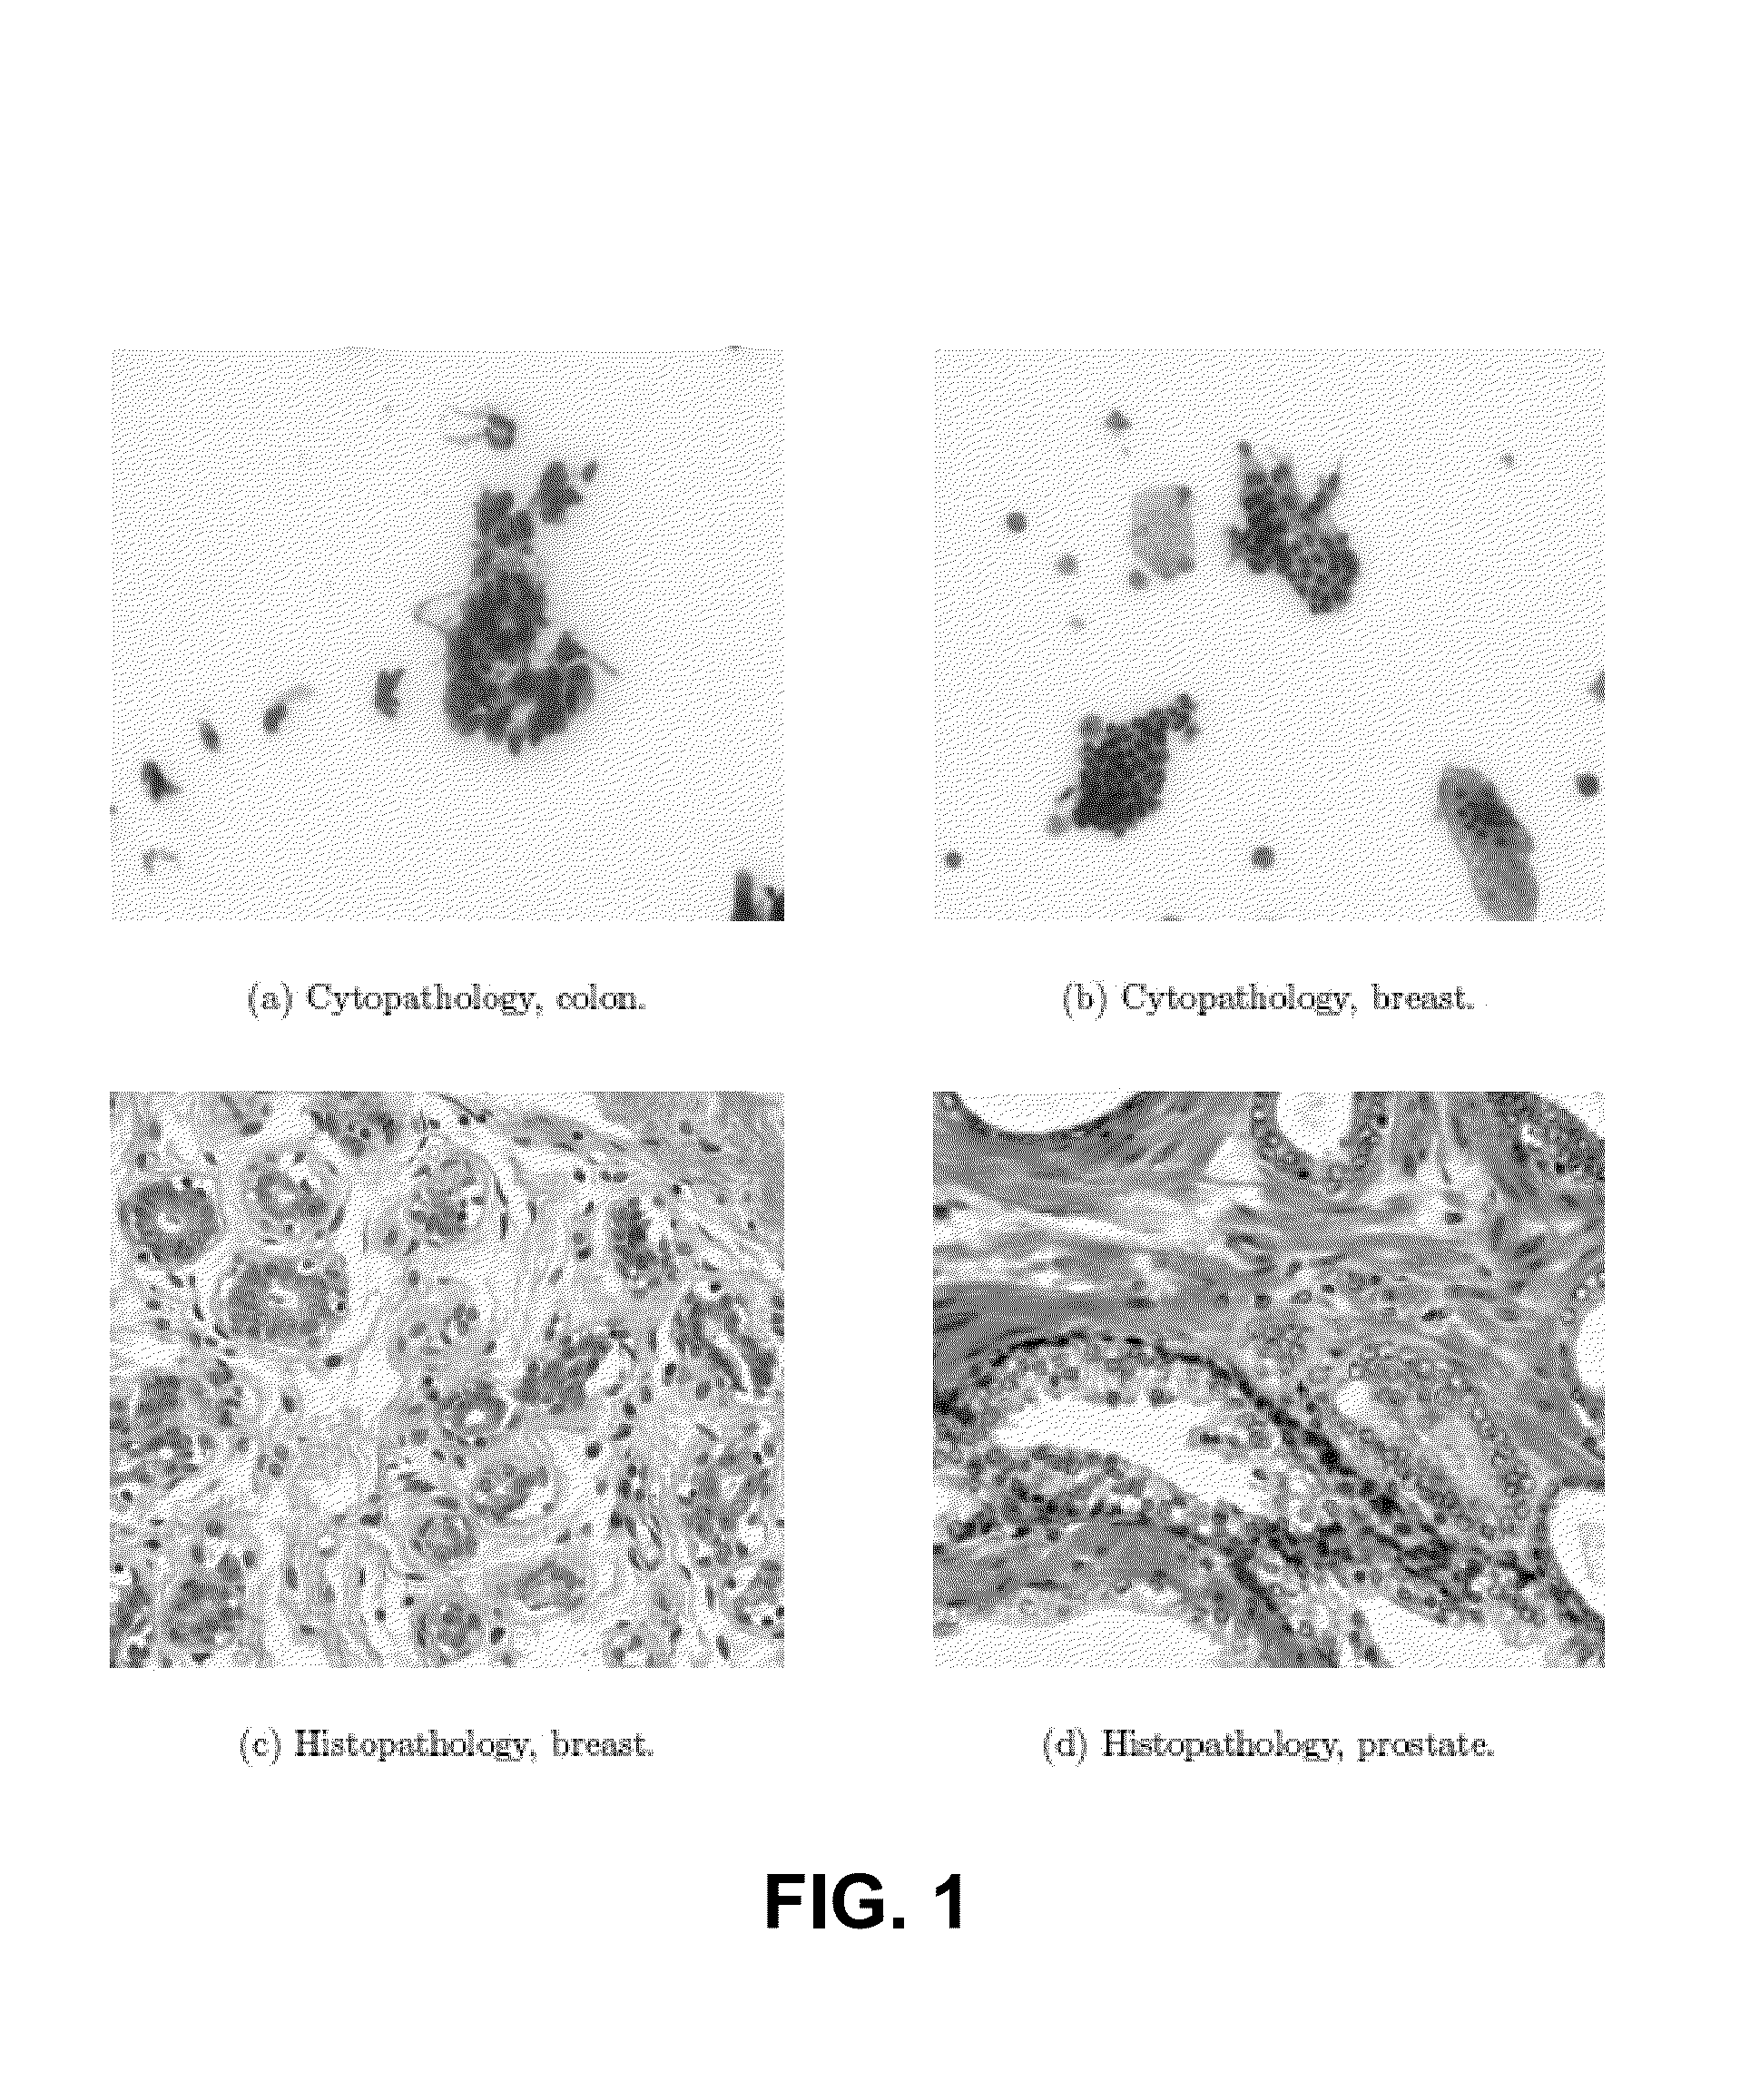 Combinational pixel-by-pixel and object-level classifying, segmenting, and agglomerating in performing quantitative image analysis that distinguishes between healthy non-cancerous and cancerous cell nuclei and delineates nuclear, cytoplasm, and stromal material objects from stained biological tissue materials